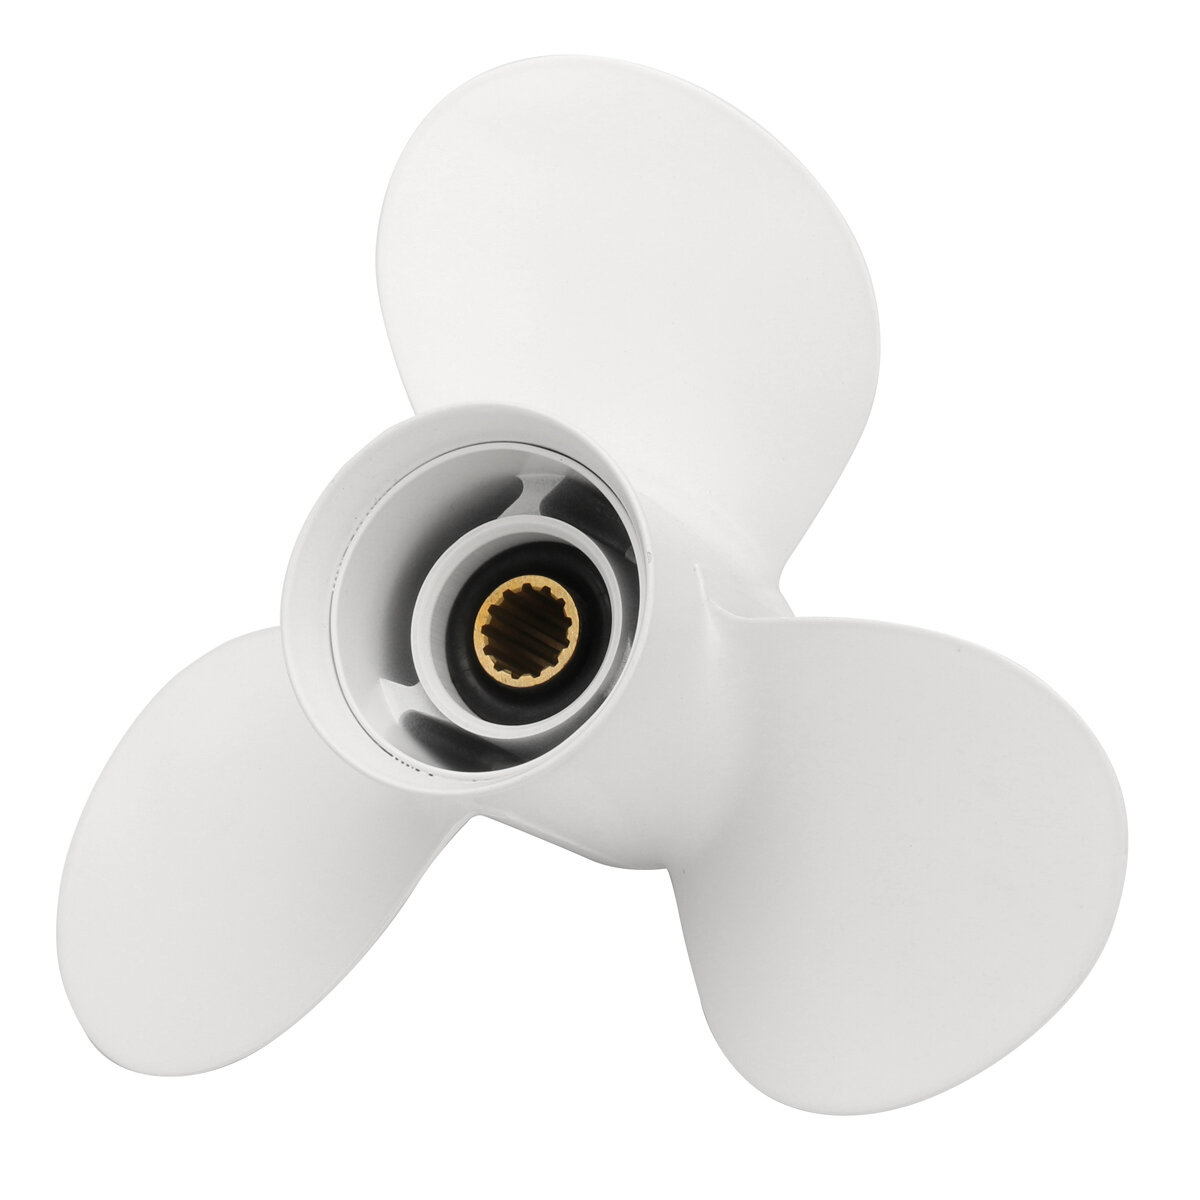 Image of 11 3/8 x 12 Aluminum Boat Propeller Prop Outboard Motor 3 Blade For Yamaha 40 50 60hp Engines